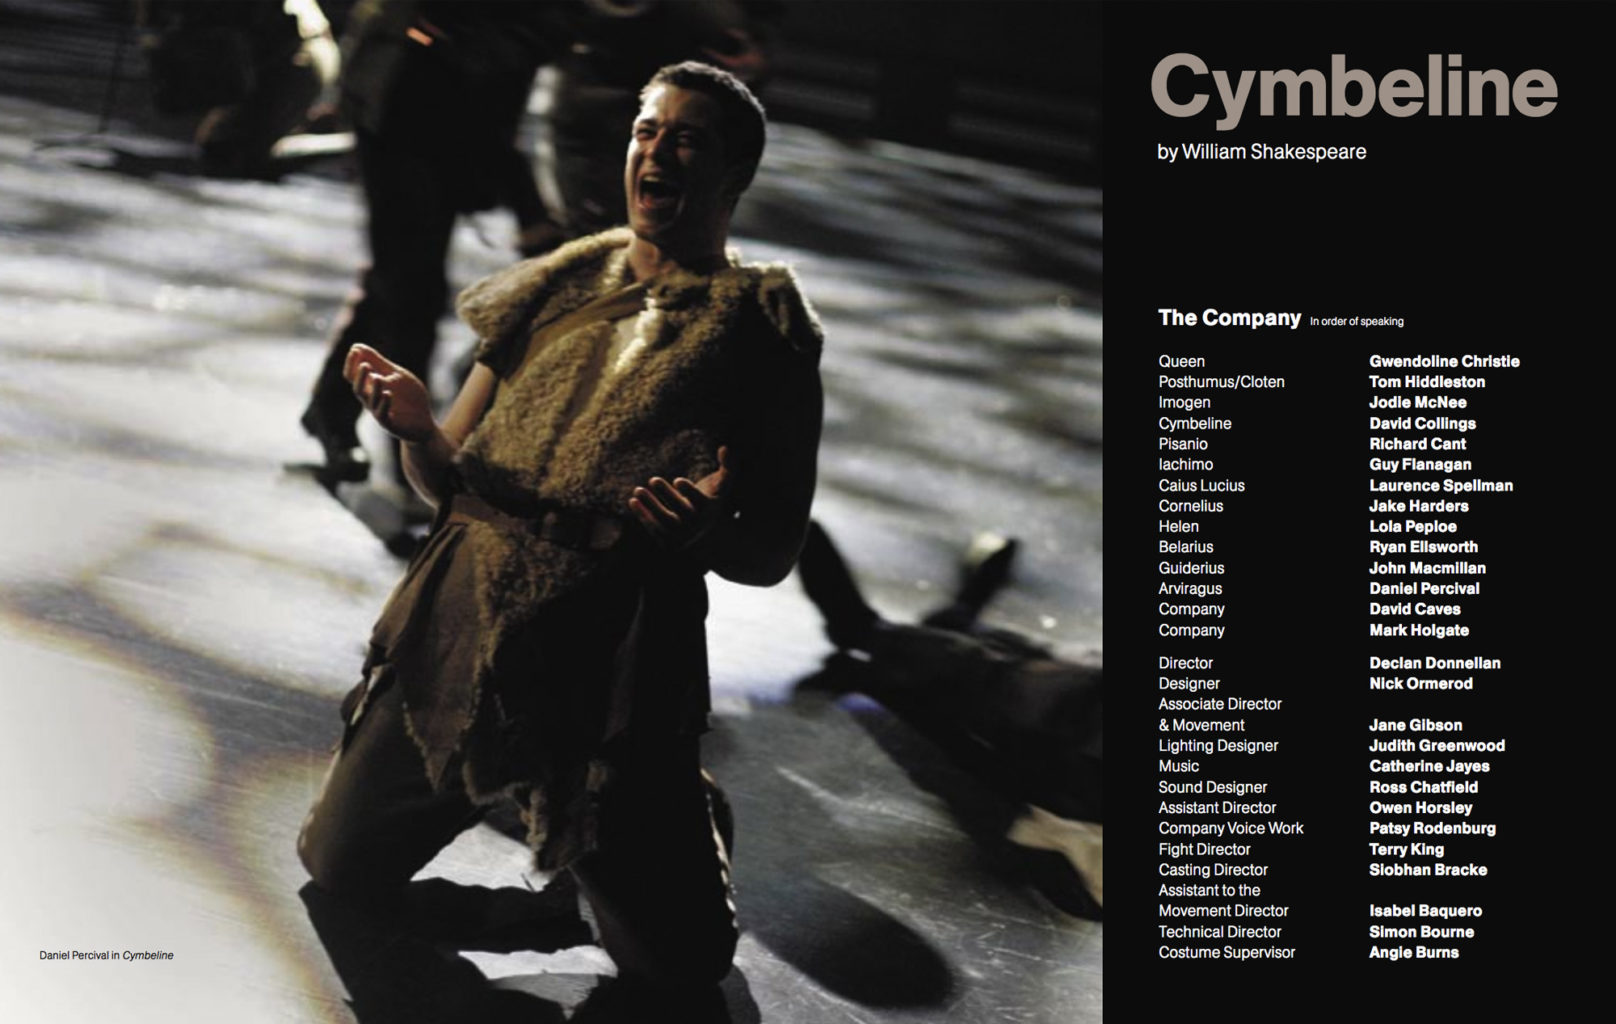 Programme for Cheek by Jowl’s production of Cymbeline